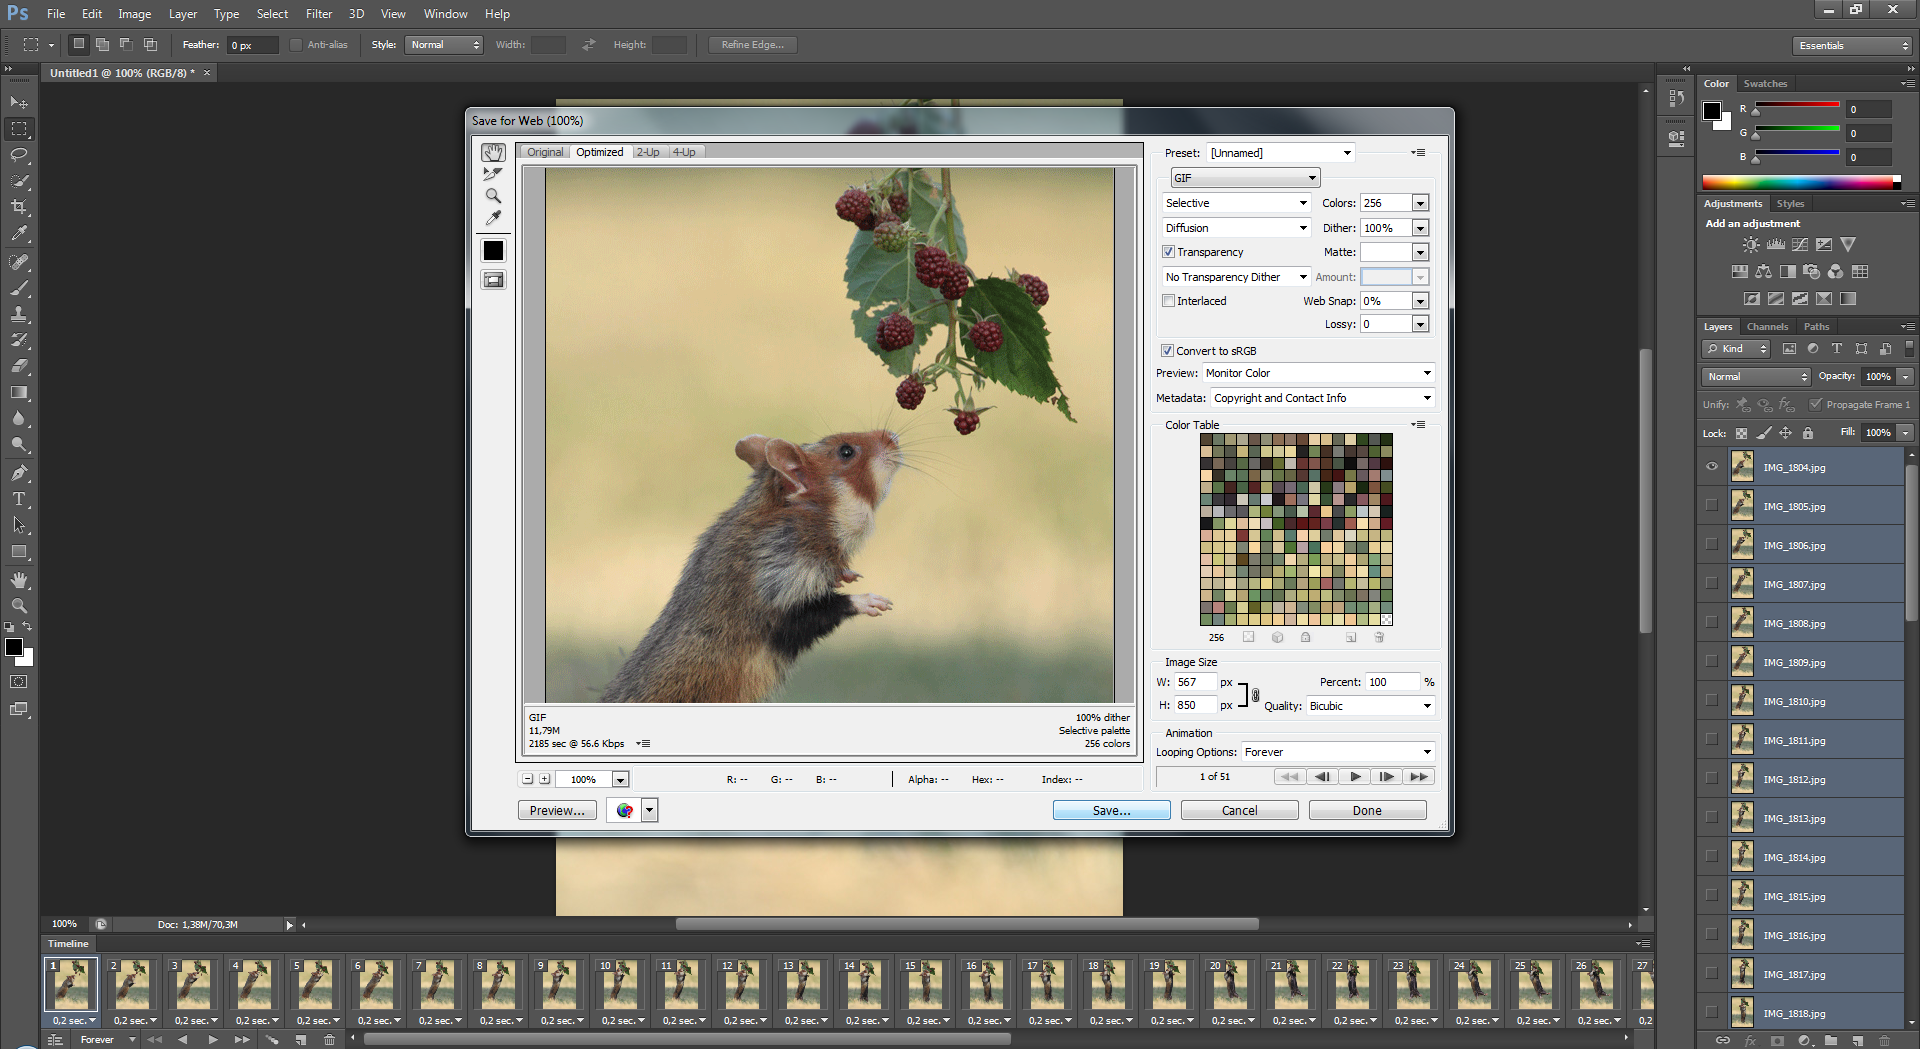 How to make an animated GIF in Photoshop in less than 10